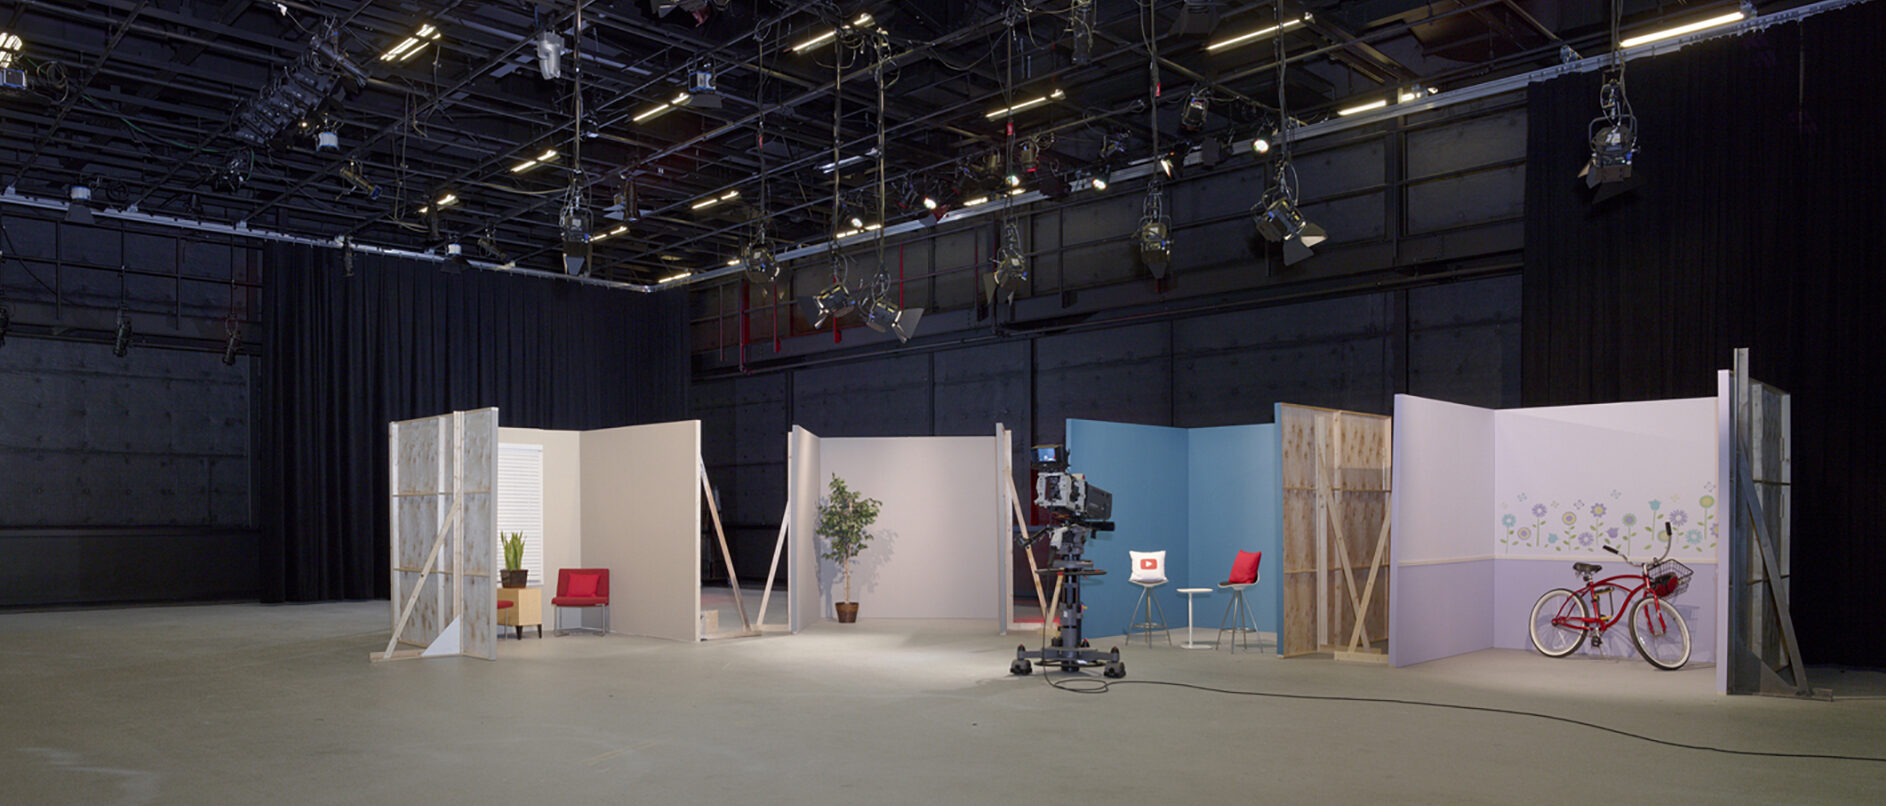 A spacious broadcast studio with high ceilings, equipped with professional lighting rigs and a variety of set pieces including walls, furniture, and props for versatile scene setups.